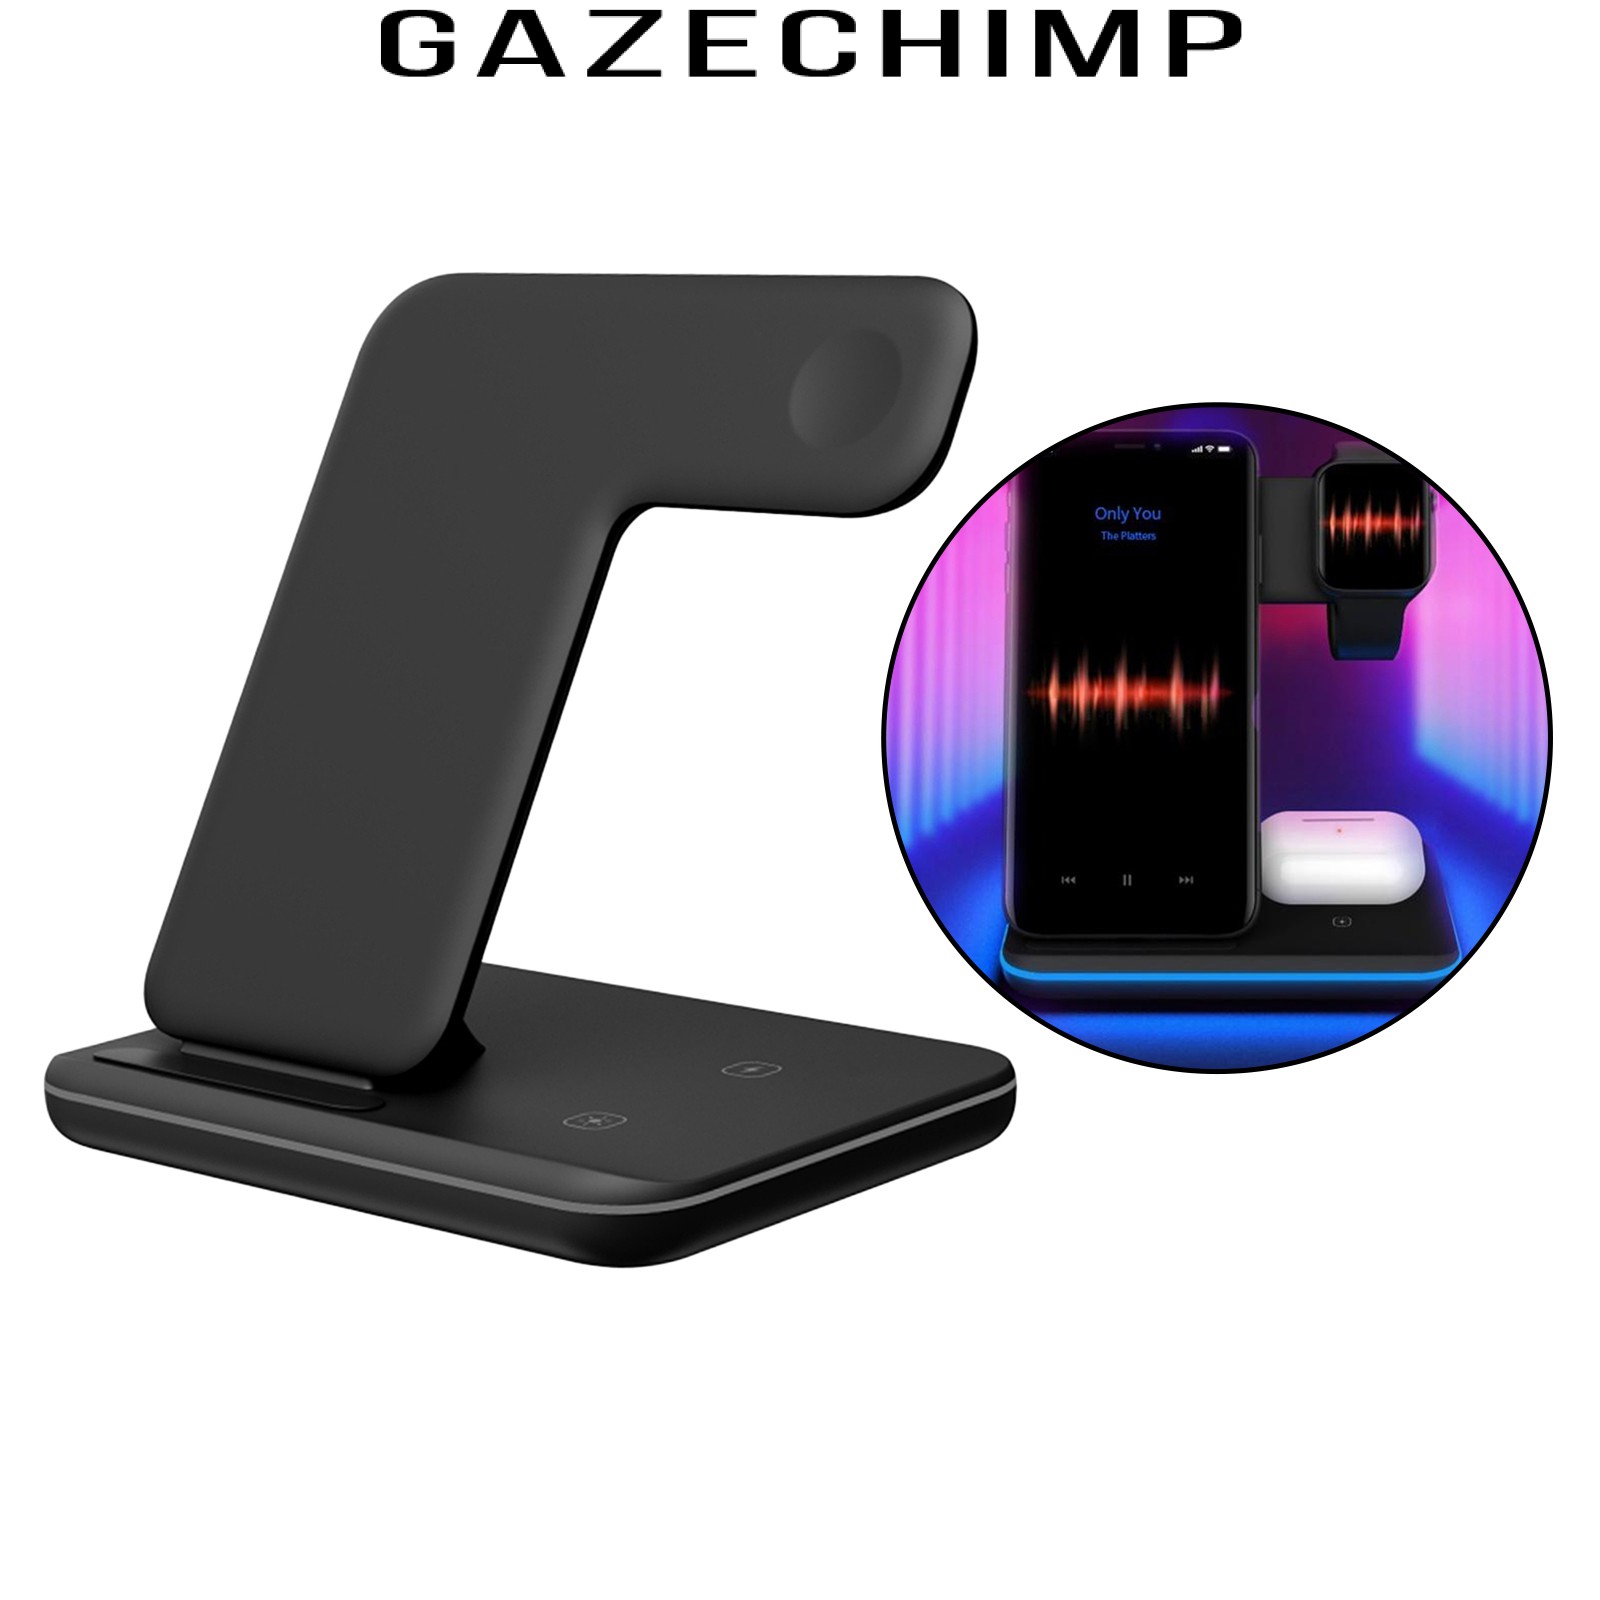 [GAZECHIMP] Wireless Charger 3 in 1 15W Qi Wireless Charging Station for iPhone SE/11 Pro/XS max/XR/X, Charging Pad for Airpods, for iWatch Series 6/SE/5/4/3/2